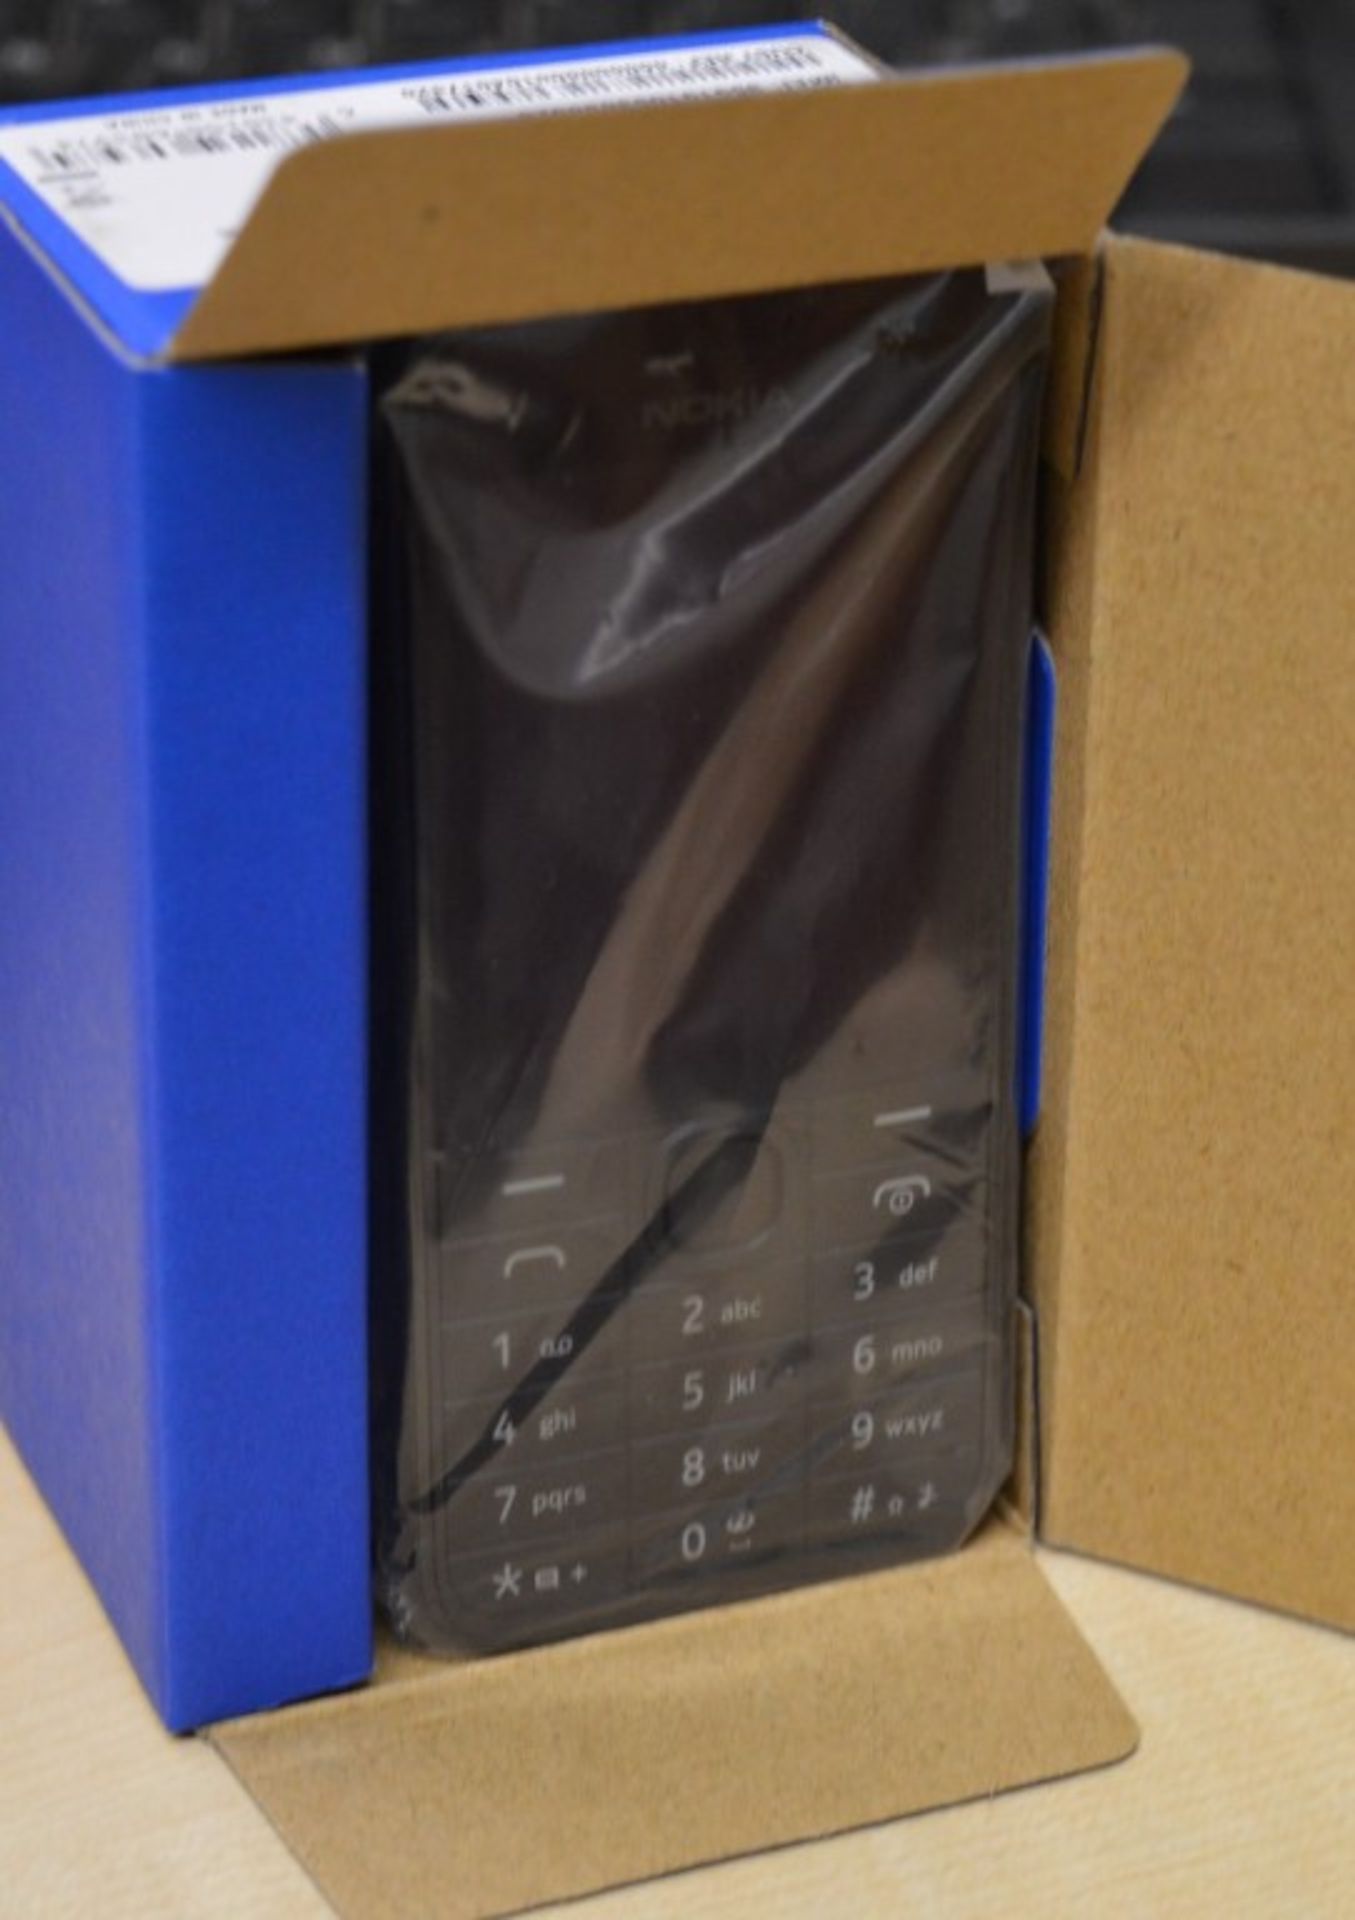 1 x Nokia 208.1 RM-948 Mobile Phone - Unused Boxed Stock - Box Opened But Contents Unused - Includes - Image 4 of 4